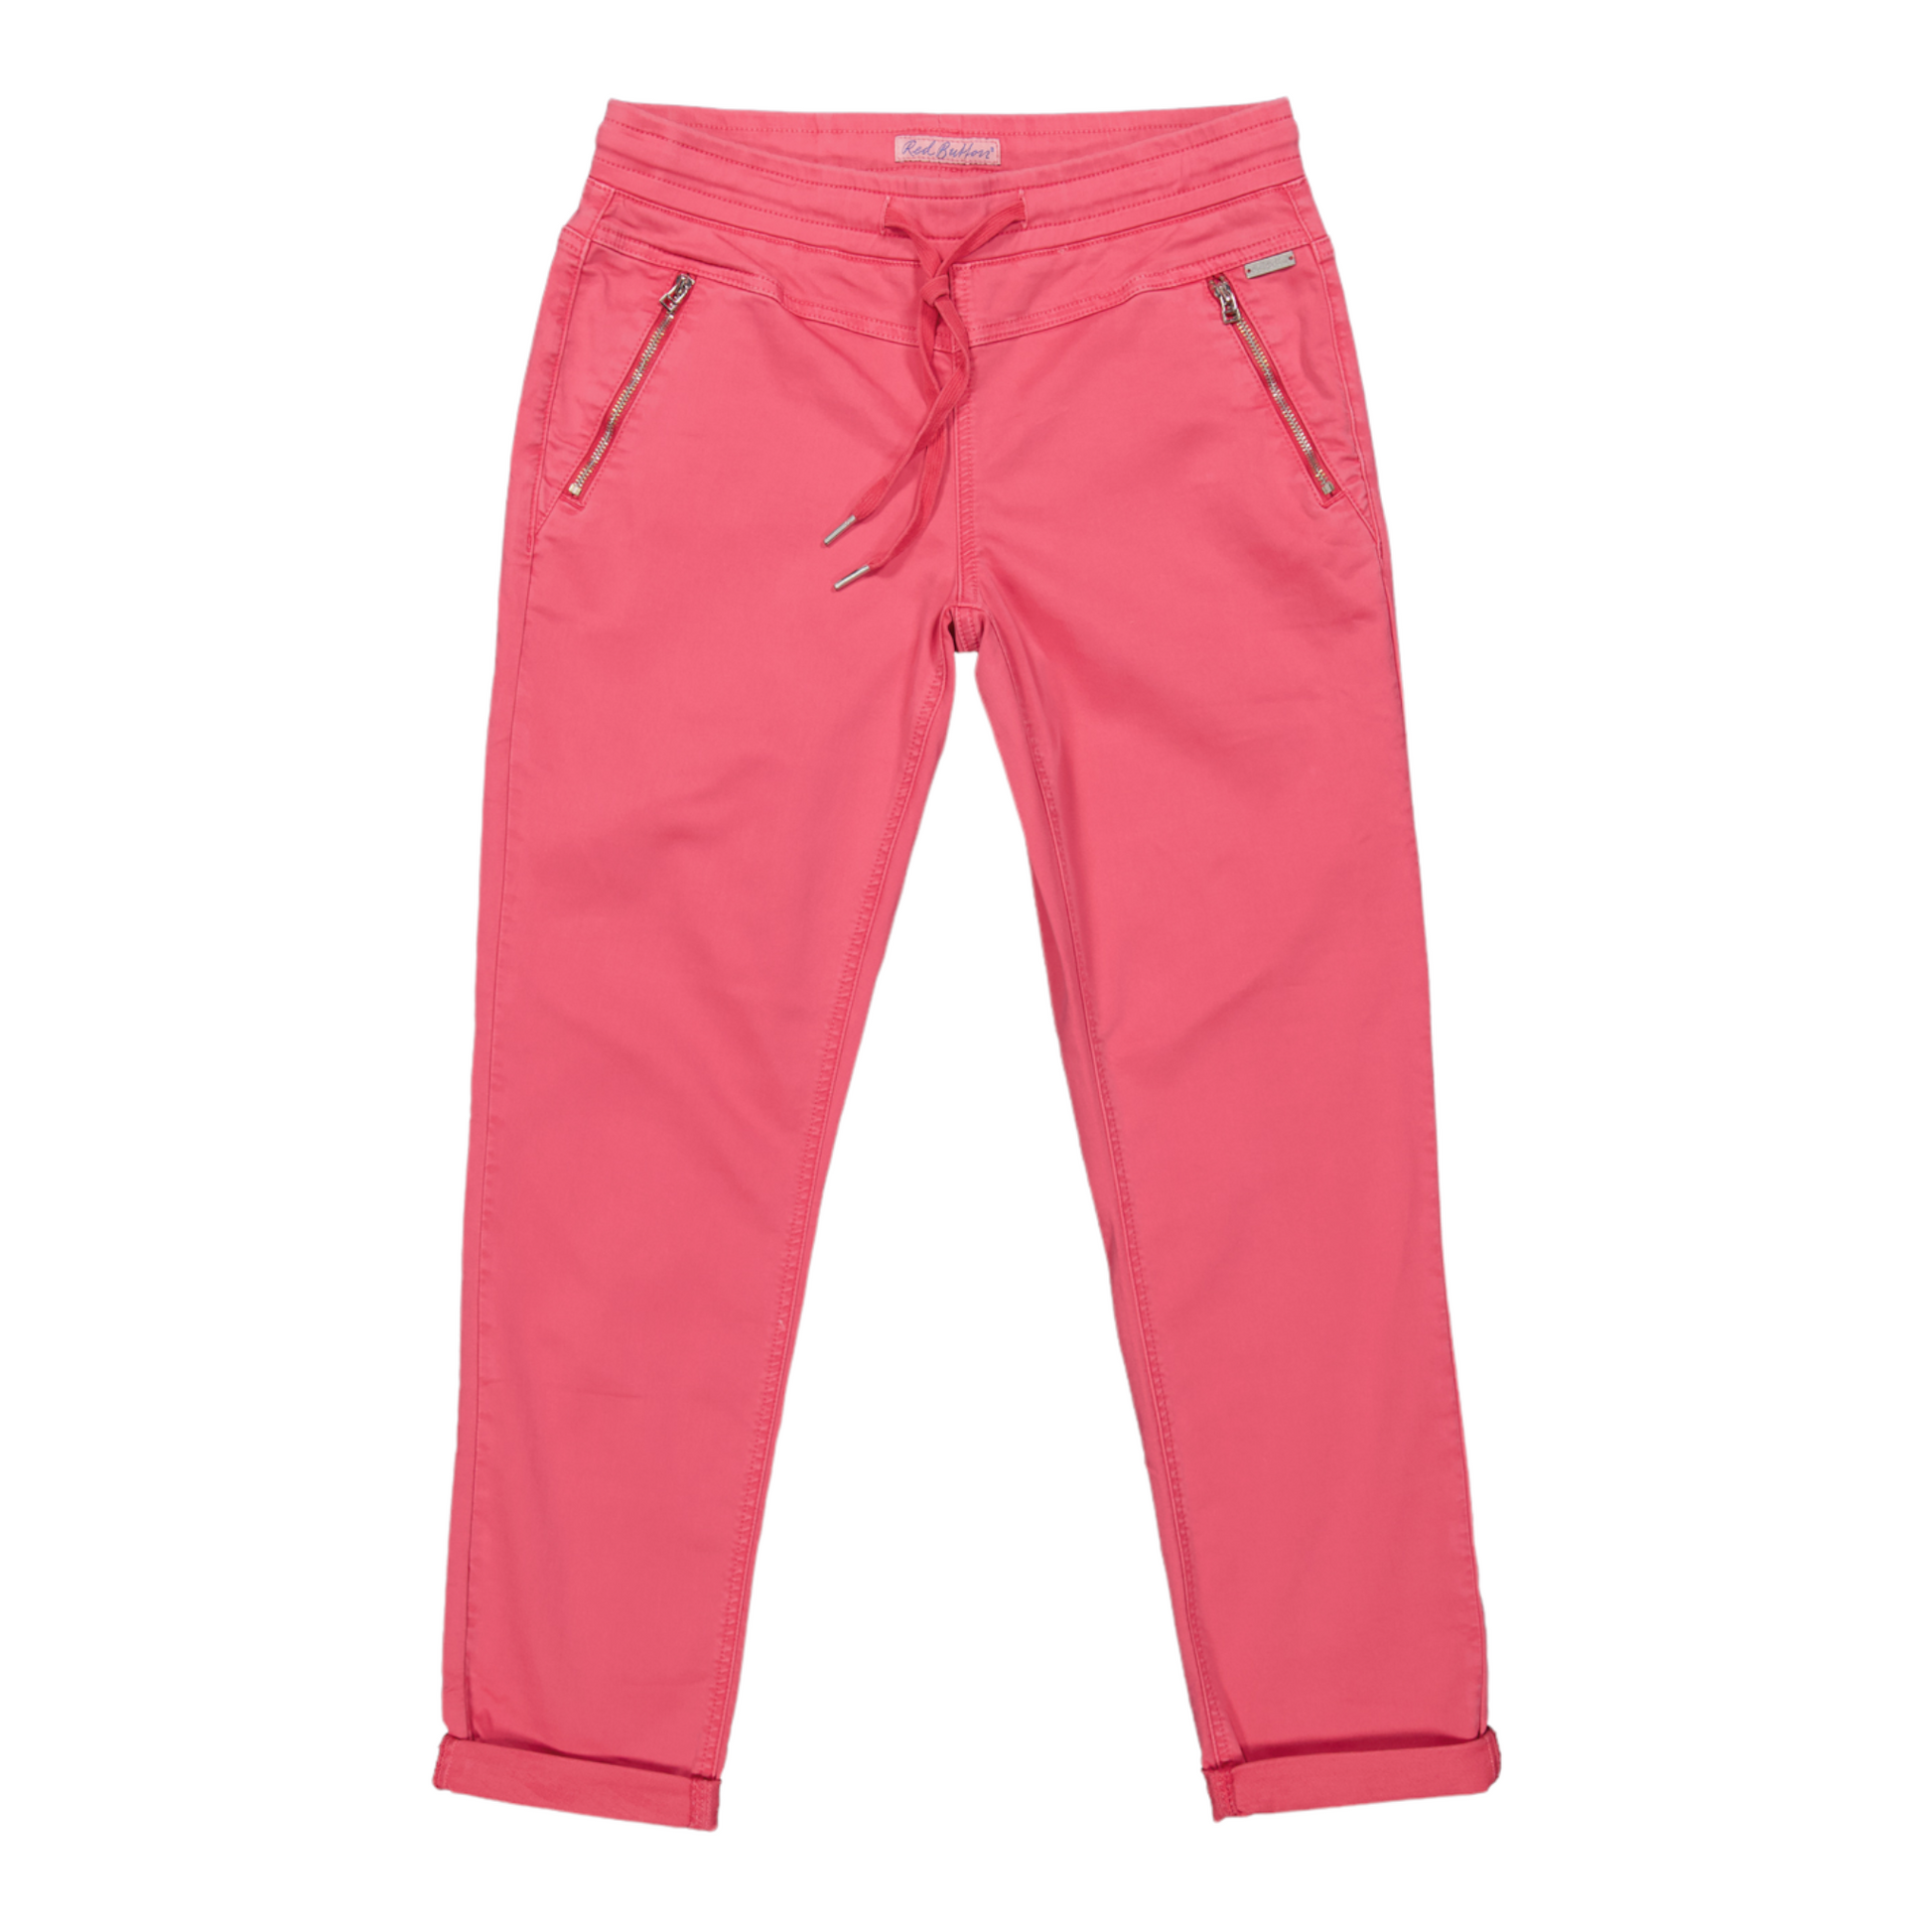 Conker Boutique Red Button Tessy jogger in Raspberry